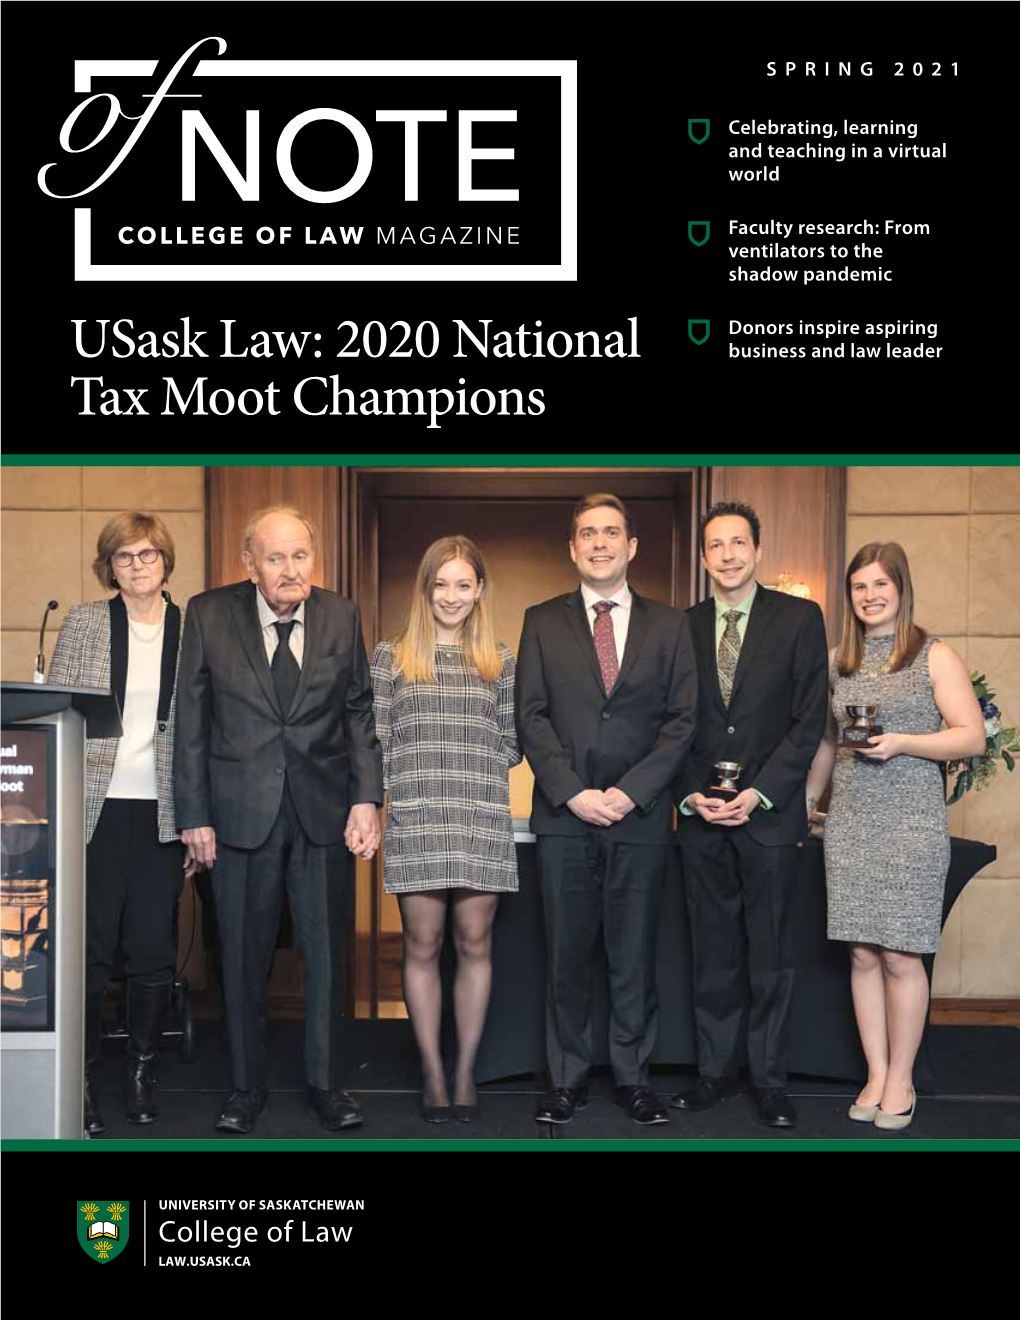 Usask Law: 2020 National Tax Moot Champions